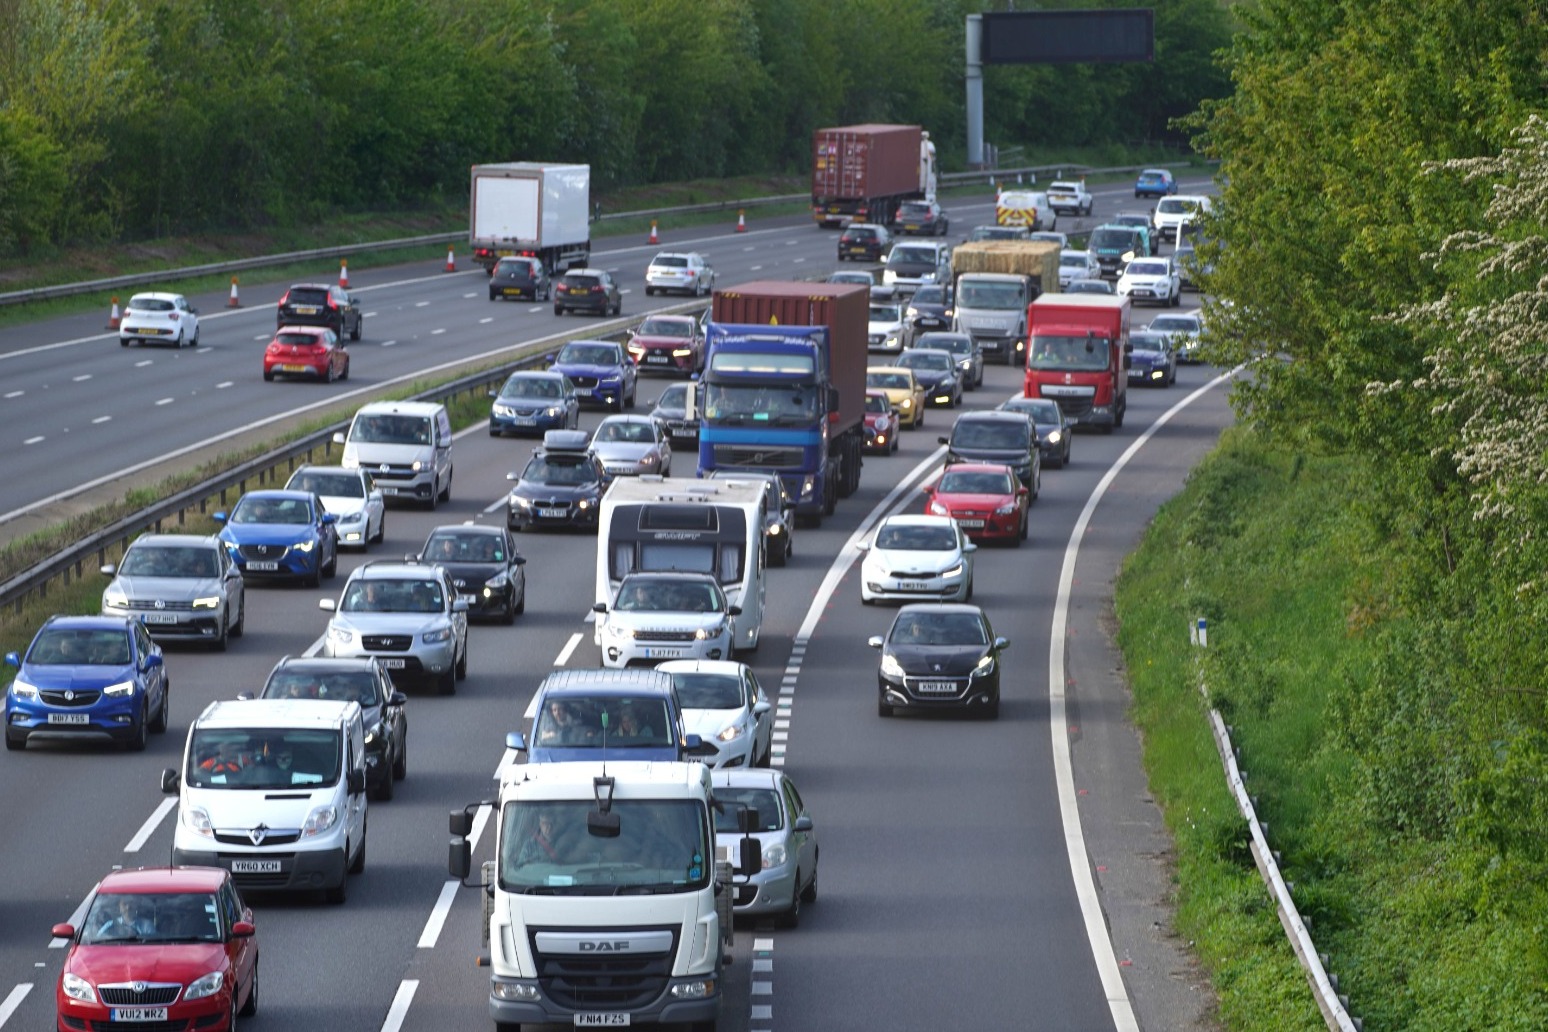 Drivers warned to expect long delays as 27.6m plan Easter car journeys 